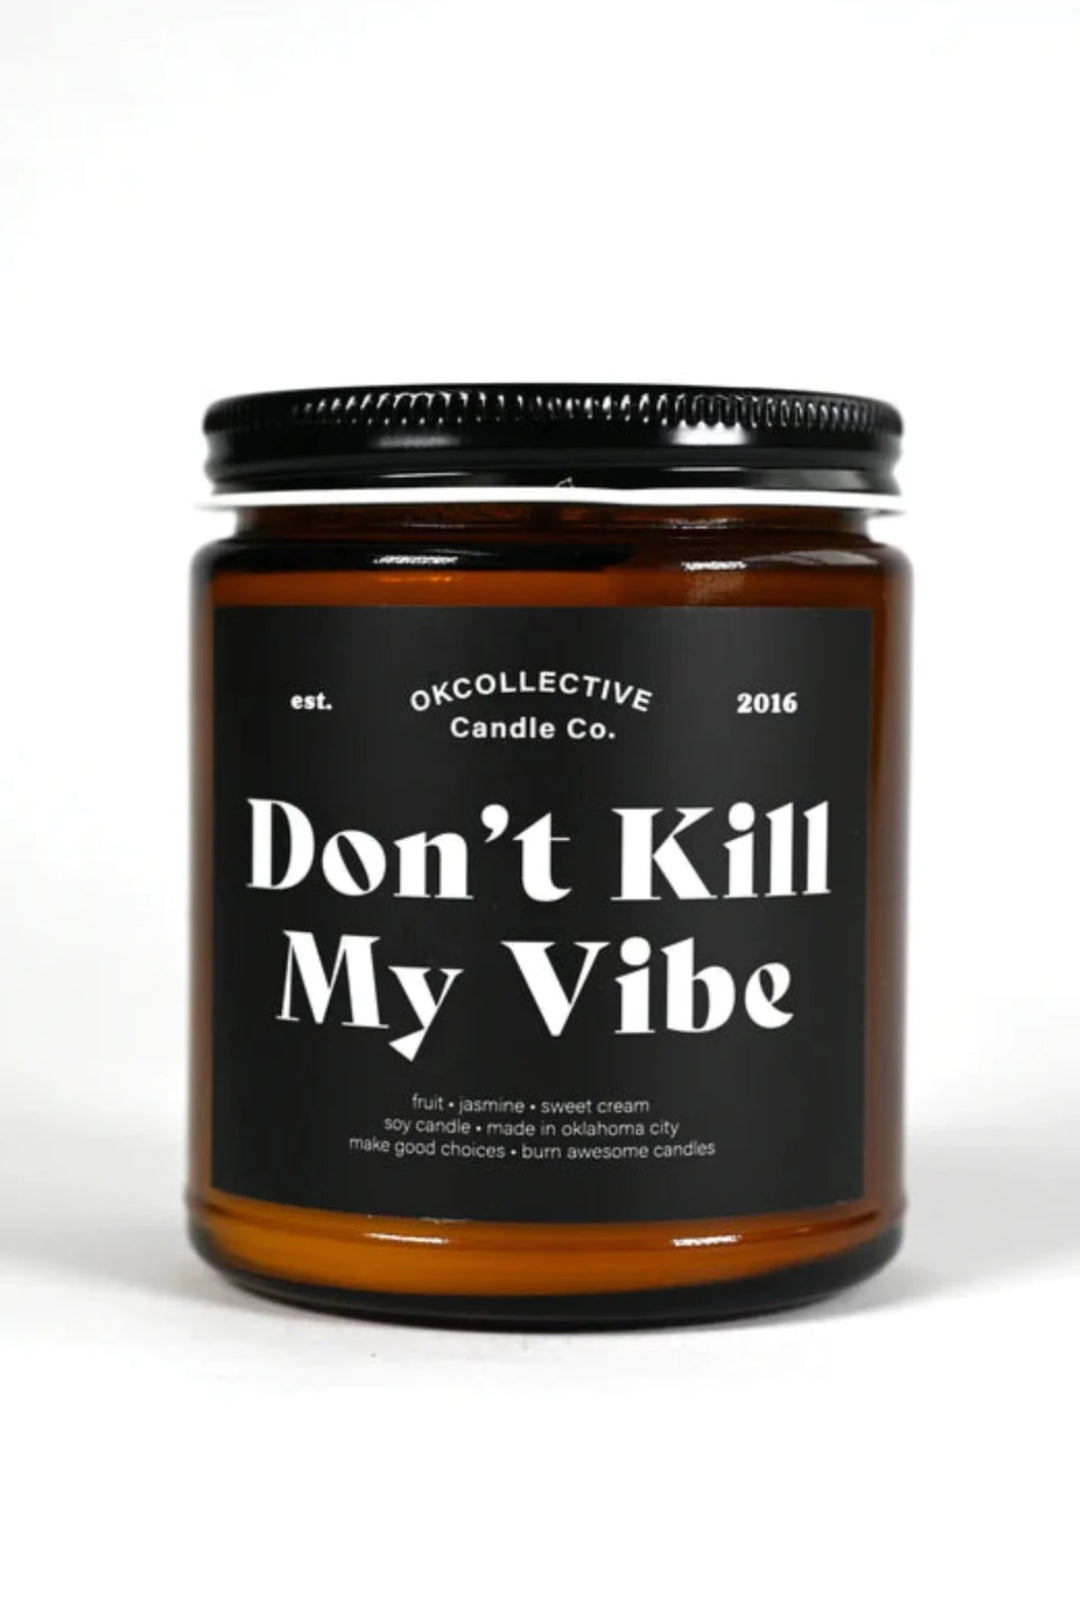 DON'T KILL MY VIBE Soy Candle - 8oz. OKcollective Candle Co. JAYDEN P BOUTIQUE